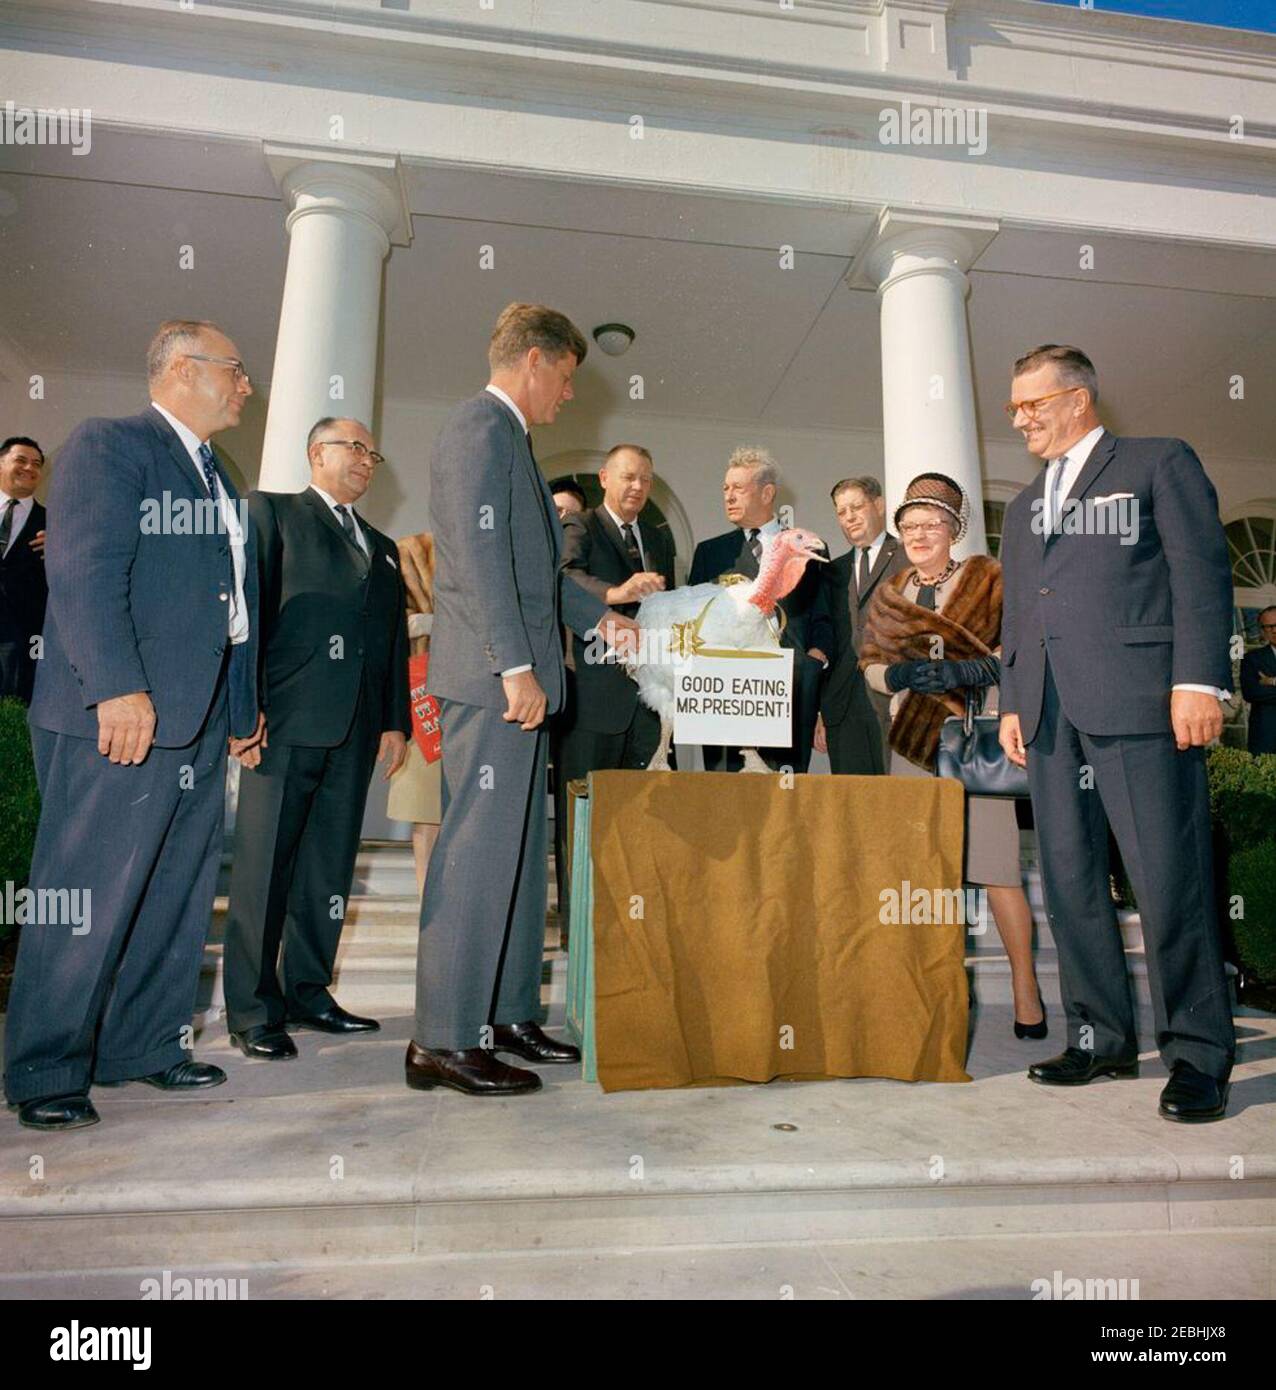 Presentation of a Thanksgiving Turkey to President Kennedy, 10:00AM. President John F. Kennedy receives a turkey presented to him for Thanksgiving by the National Turkey Federation and the Poultry and Egg National Board; President Kennedy pardoned the turkey. Left to right: Administrative Assistant to the President, Mike Manatos; Vice President of the National Turkey Federation, Morris G. Smith; unidentified; President Kennedy; President of the National Turkey Federation, Robert M. McPherrin; Senator Everett Dirksen (Illinois); Executive Secretary-Treasurer of the National Turkey Federation, M Stock Photo